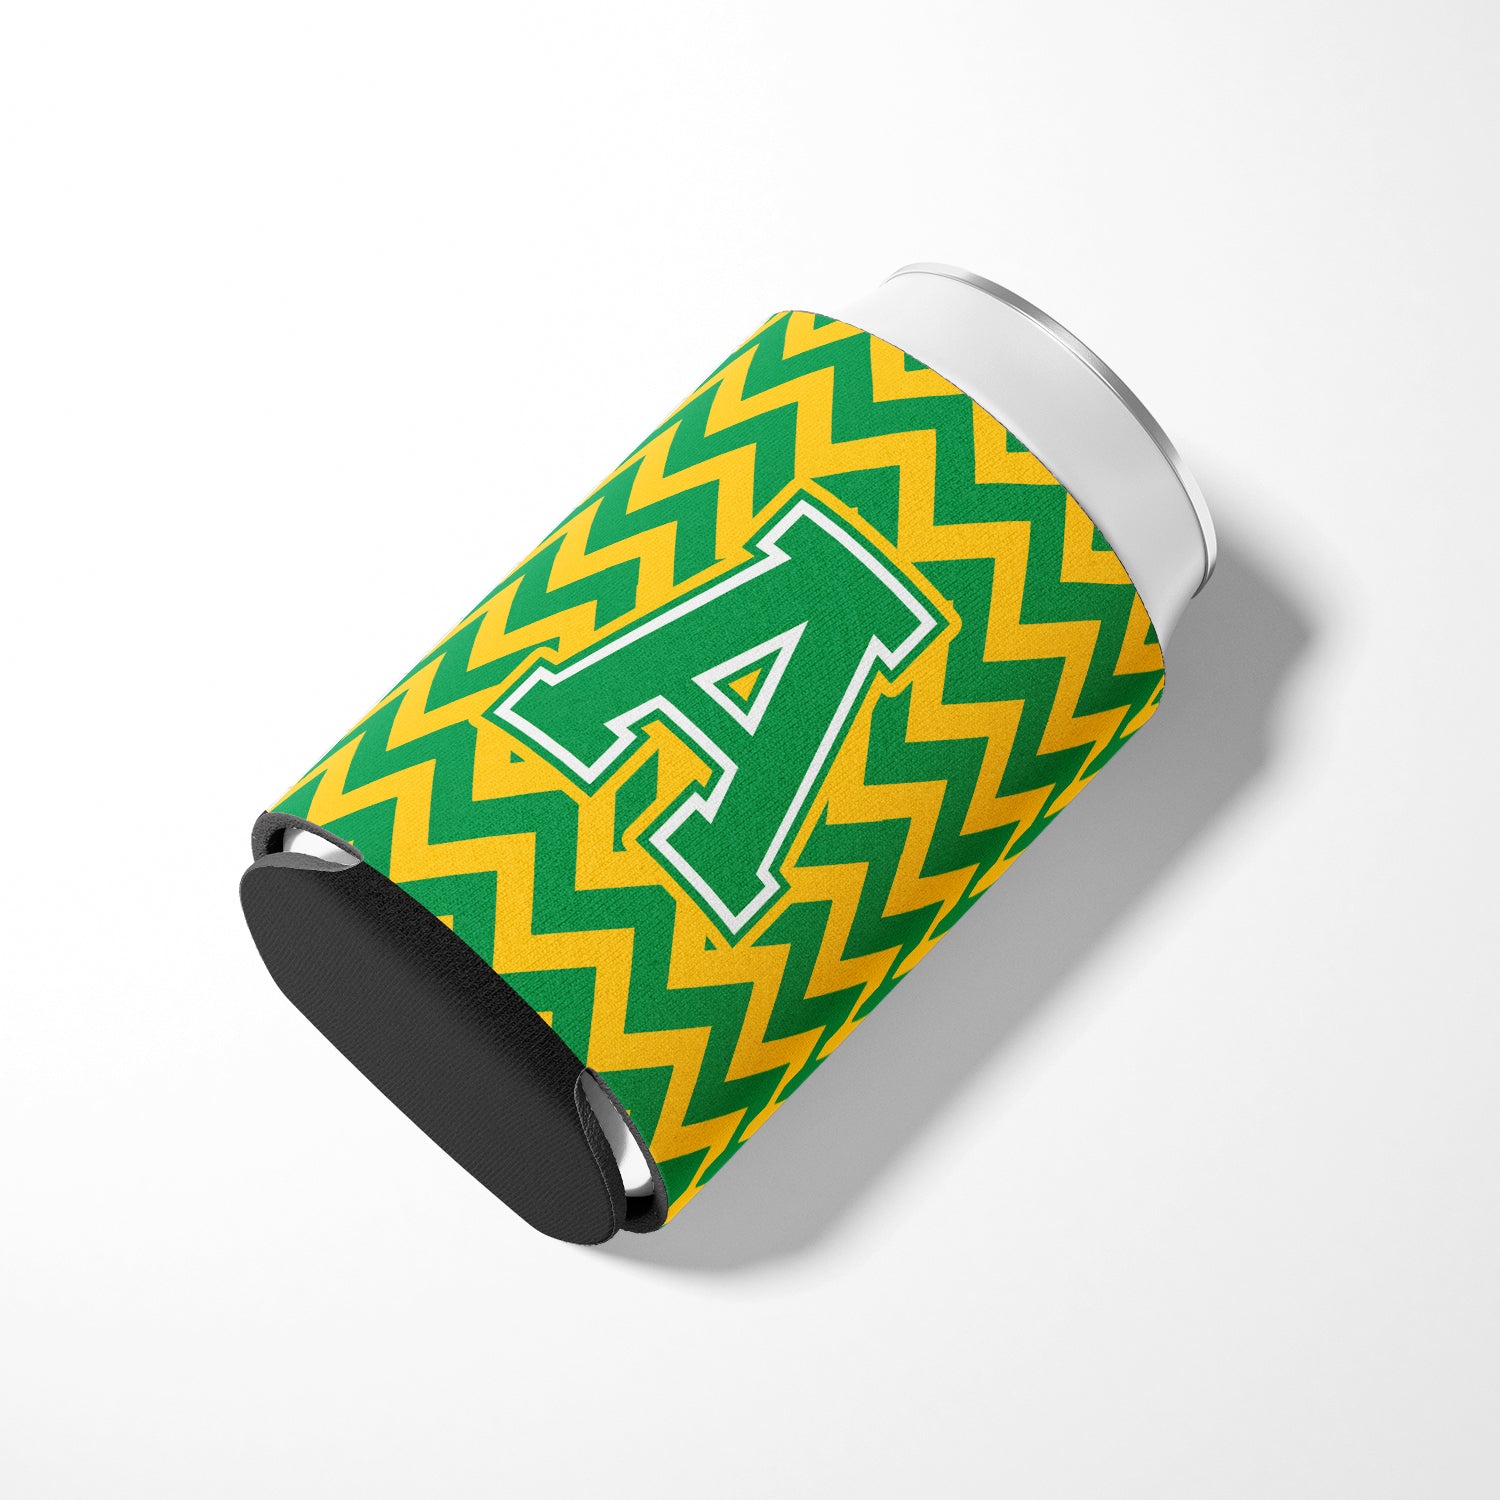 Letter A Chevron Green and Gold Can or Bottle Hugger CJ1059-ACC